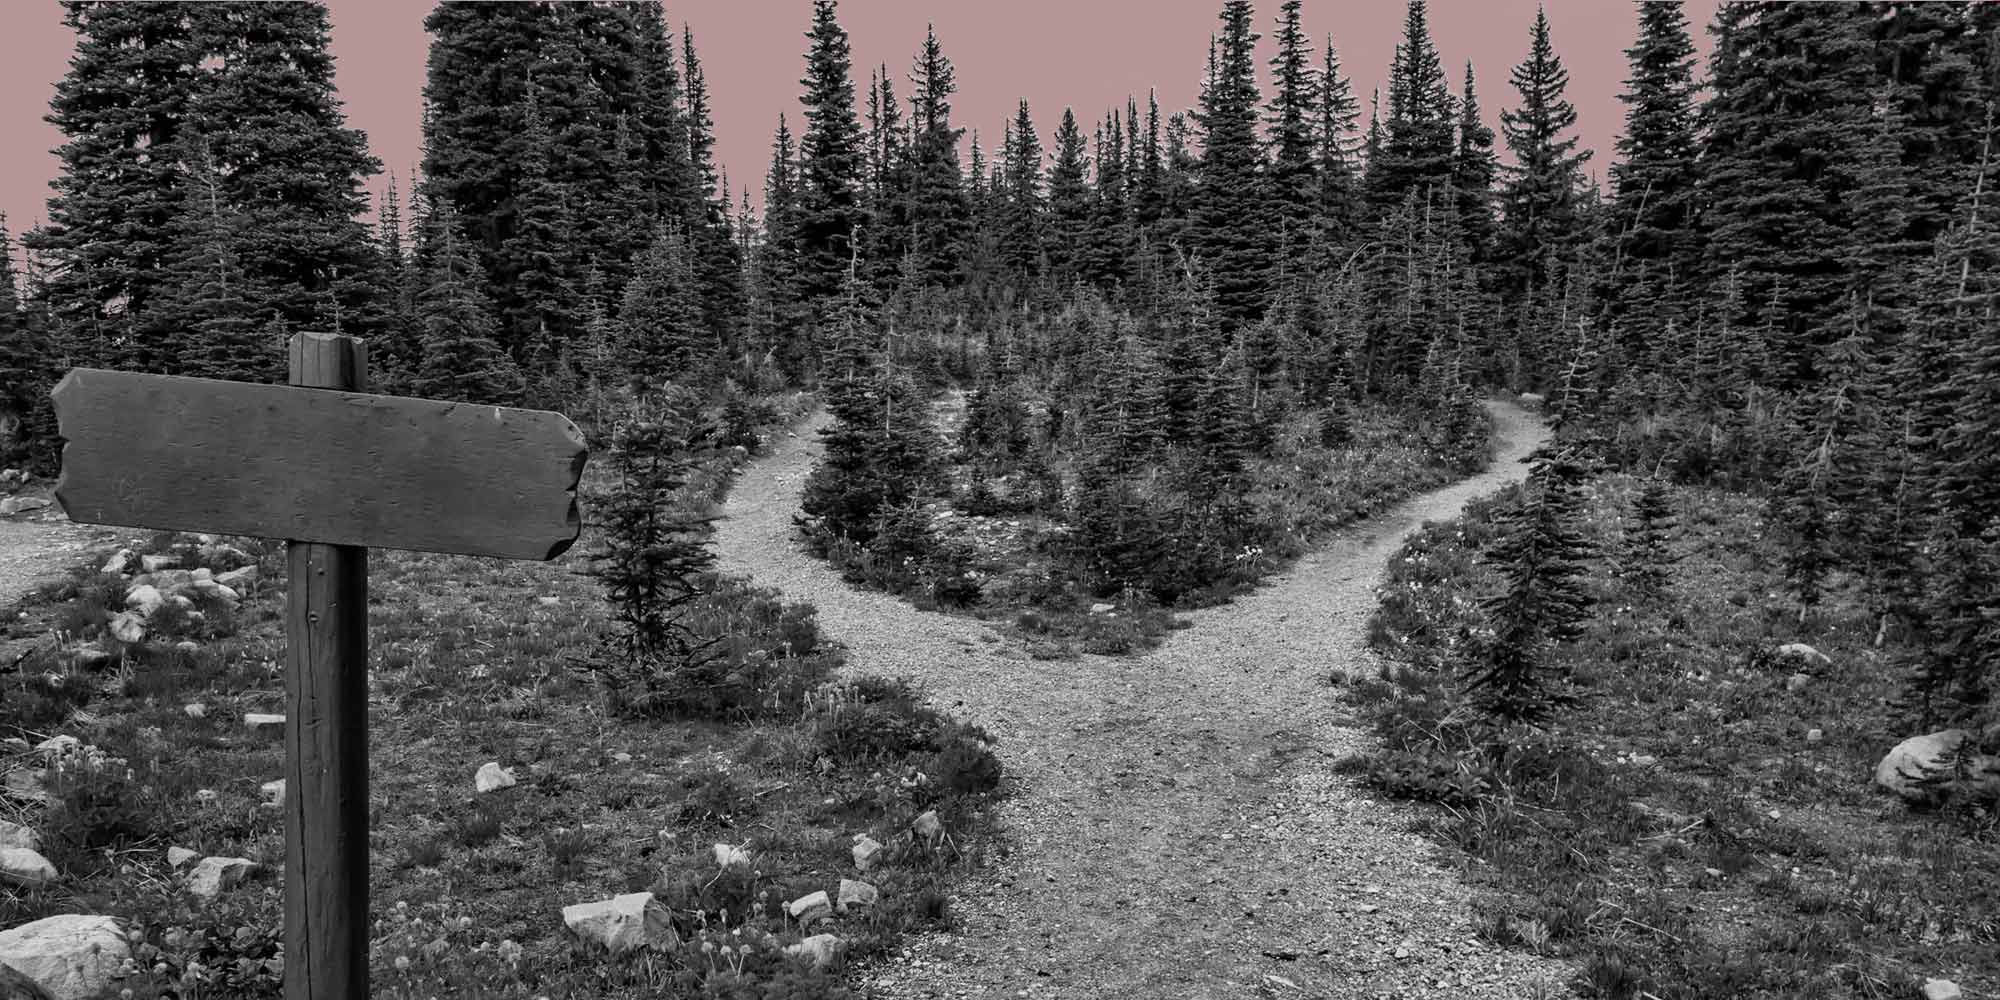 Paths through the woods. "Getting sober" is not a destination, but a process.